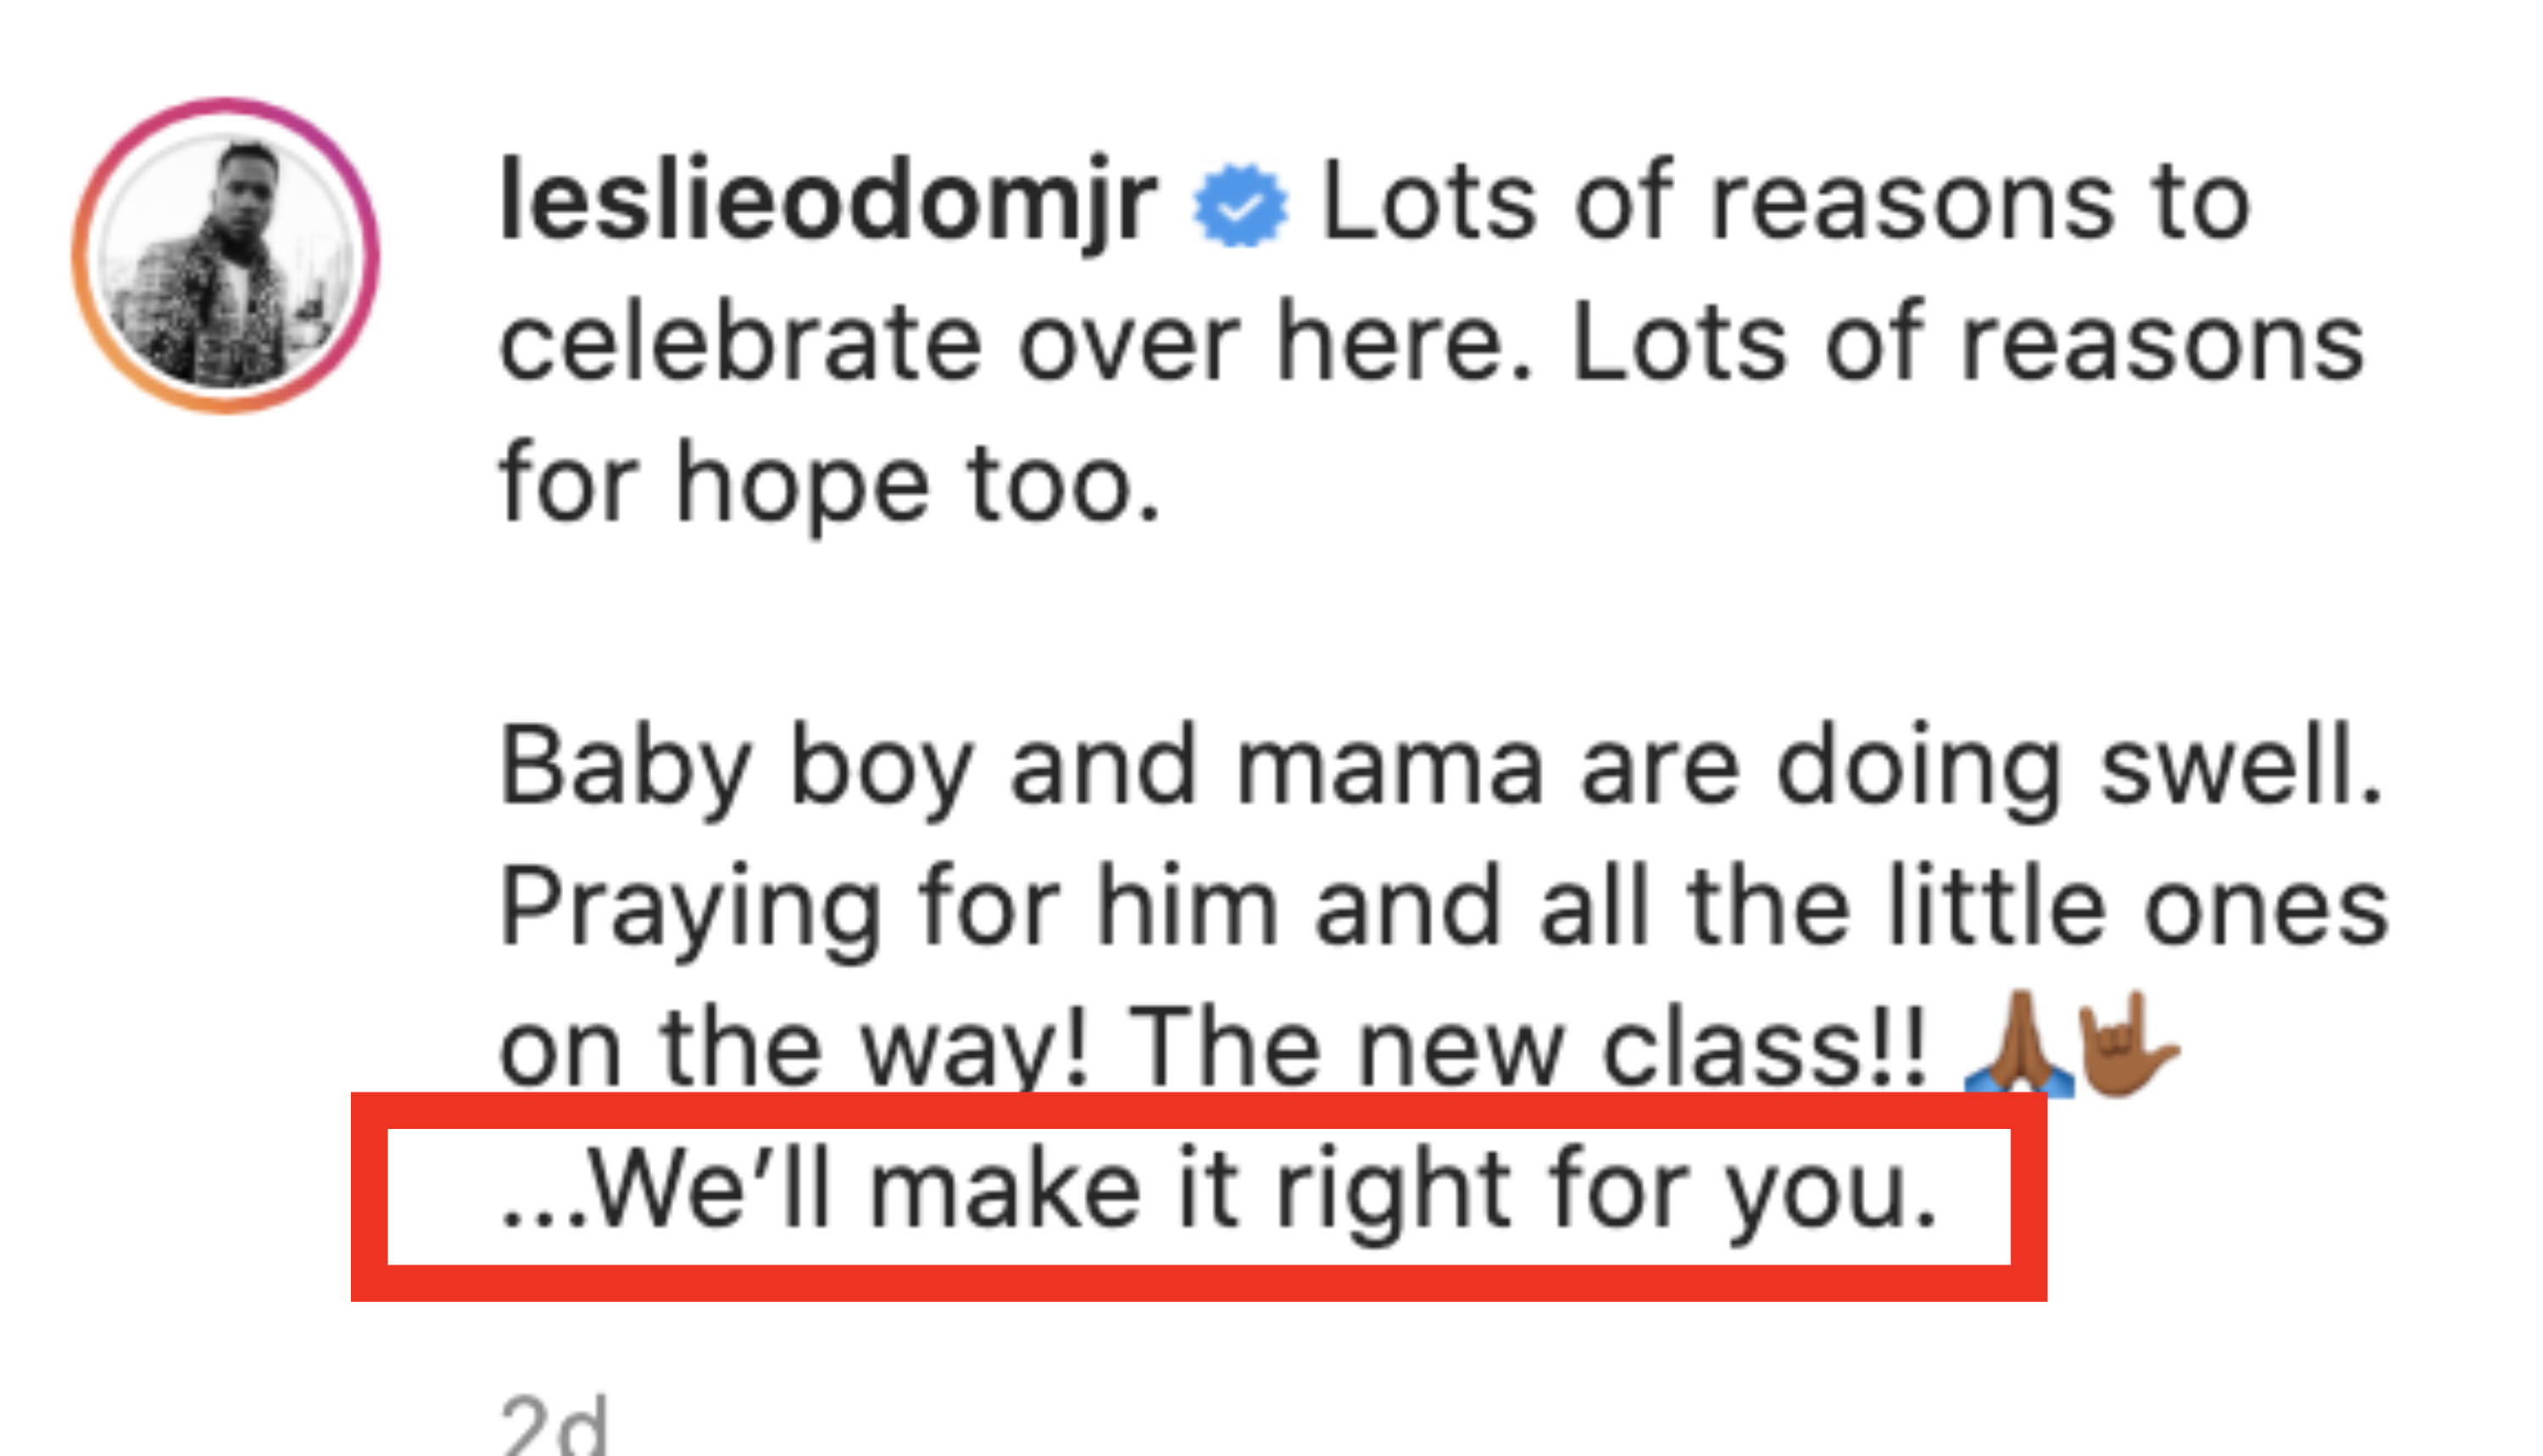 Leslie Odom Jr&#x27;s instagram caption reading: &quot;Lots of reasons to celebrate over here. Lots of reasons for hope too. Baby boy and moma are doing swell. Praying for him and all the little ones on the way! The new class! We&#x27;ll make it right for you&quot;